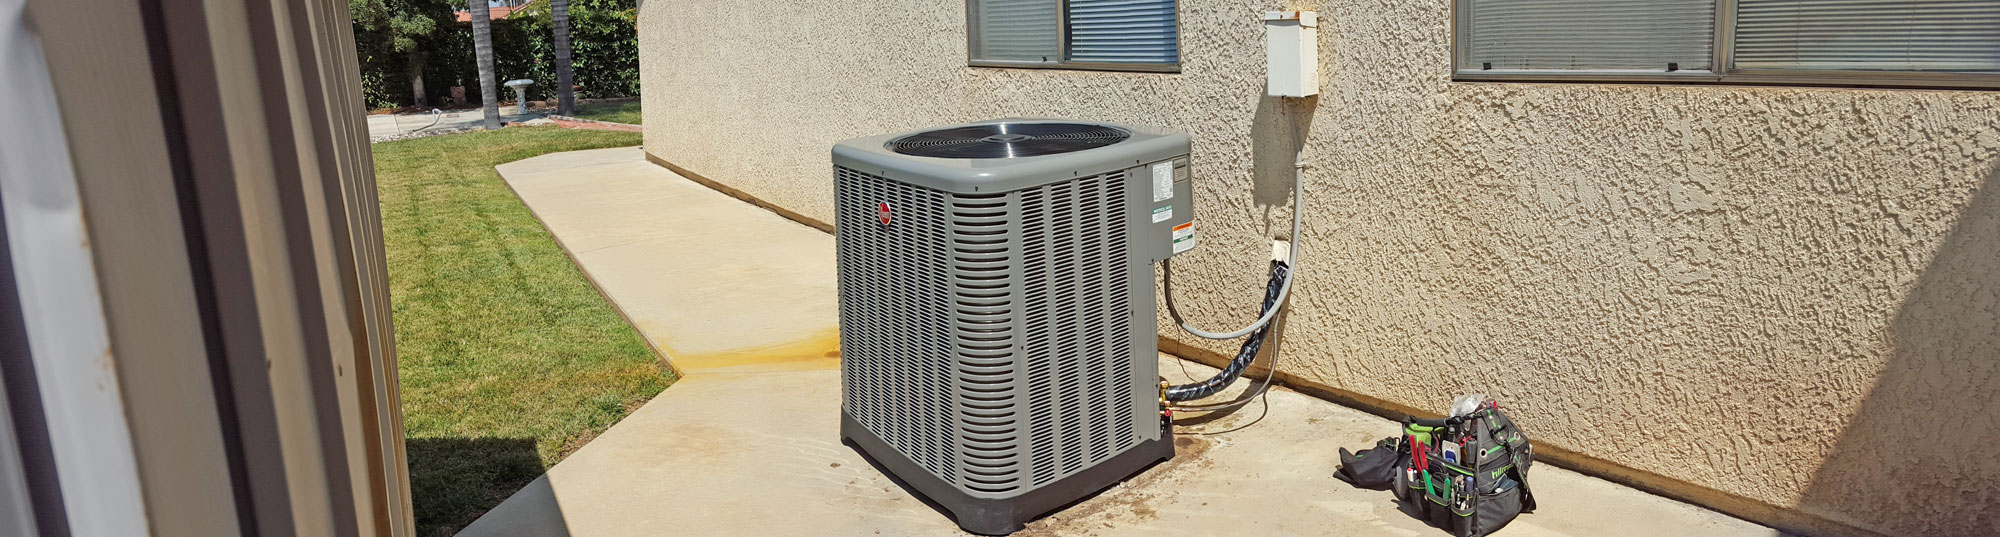 Air Conditioning and Heating Replacement Installation Moreno Valley, California